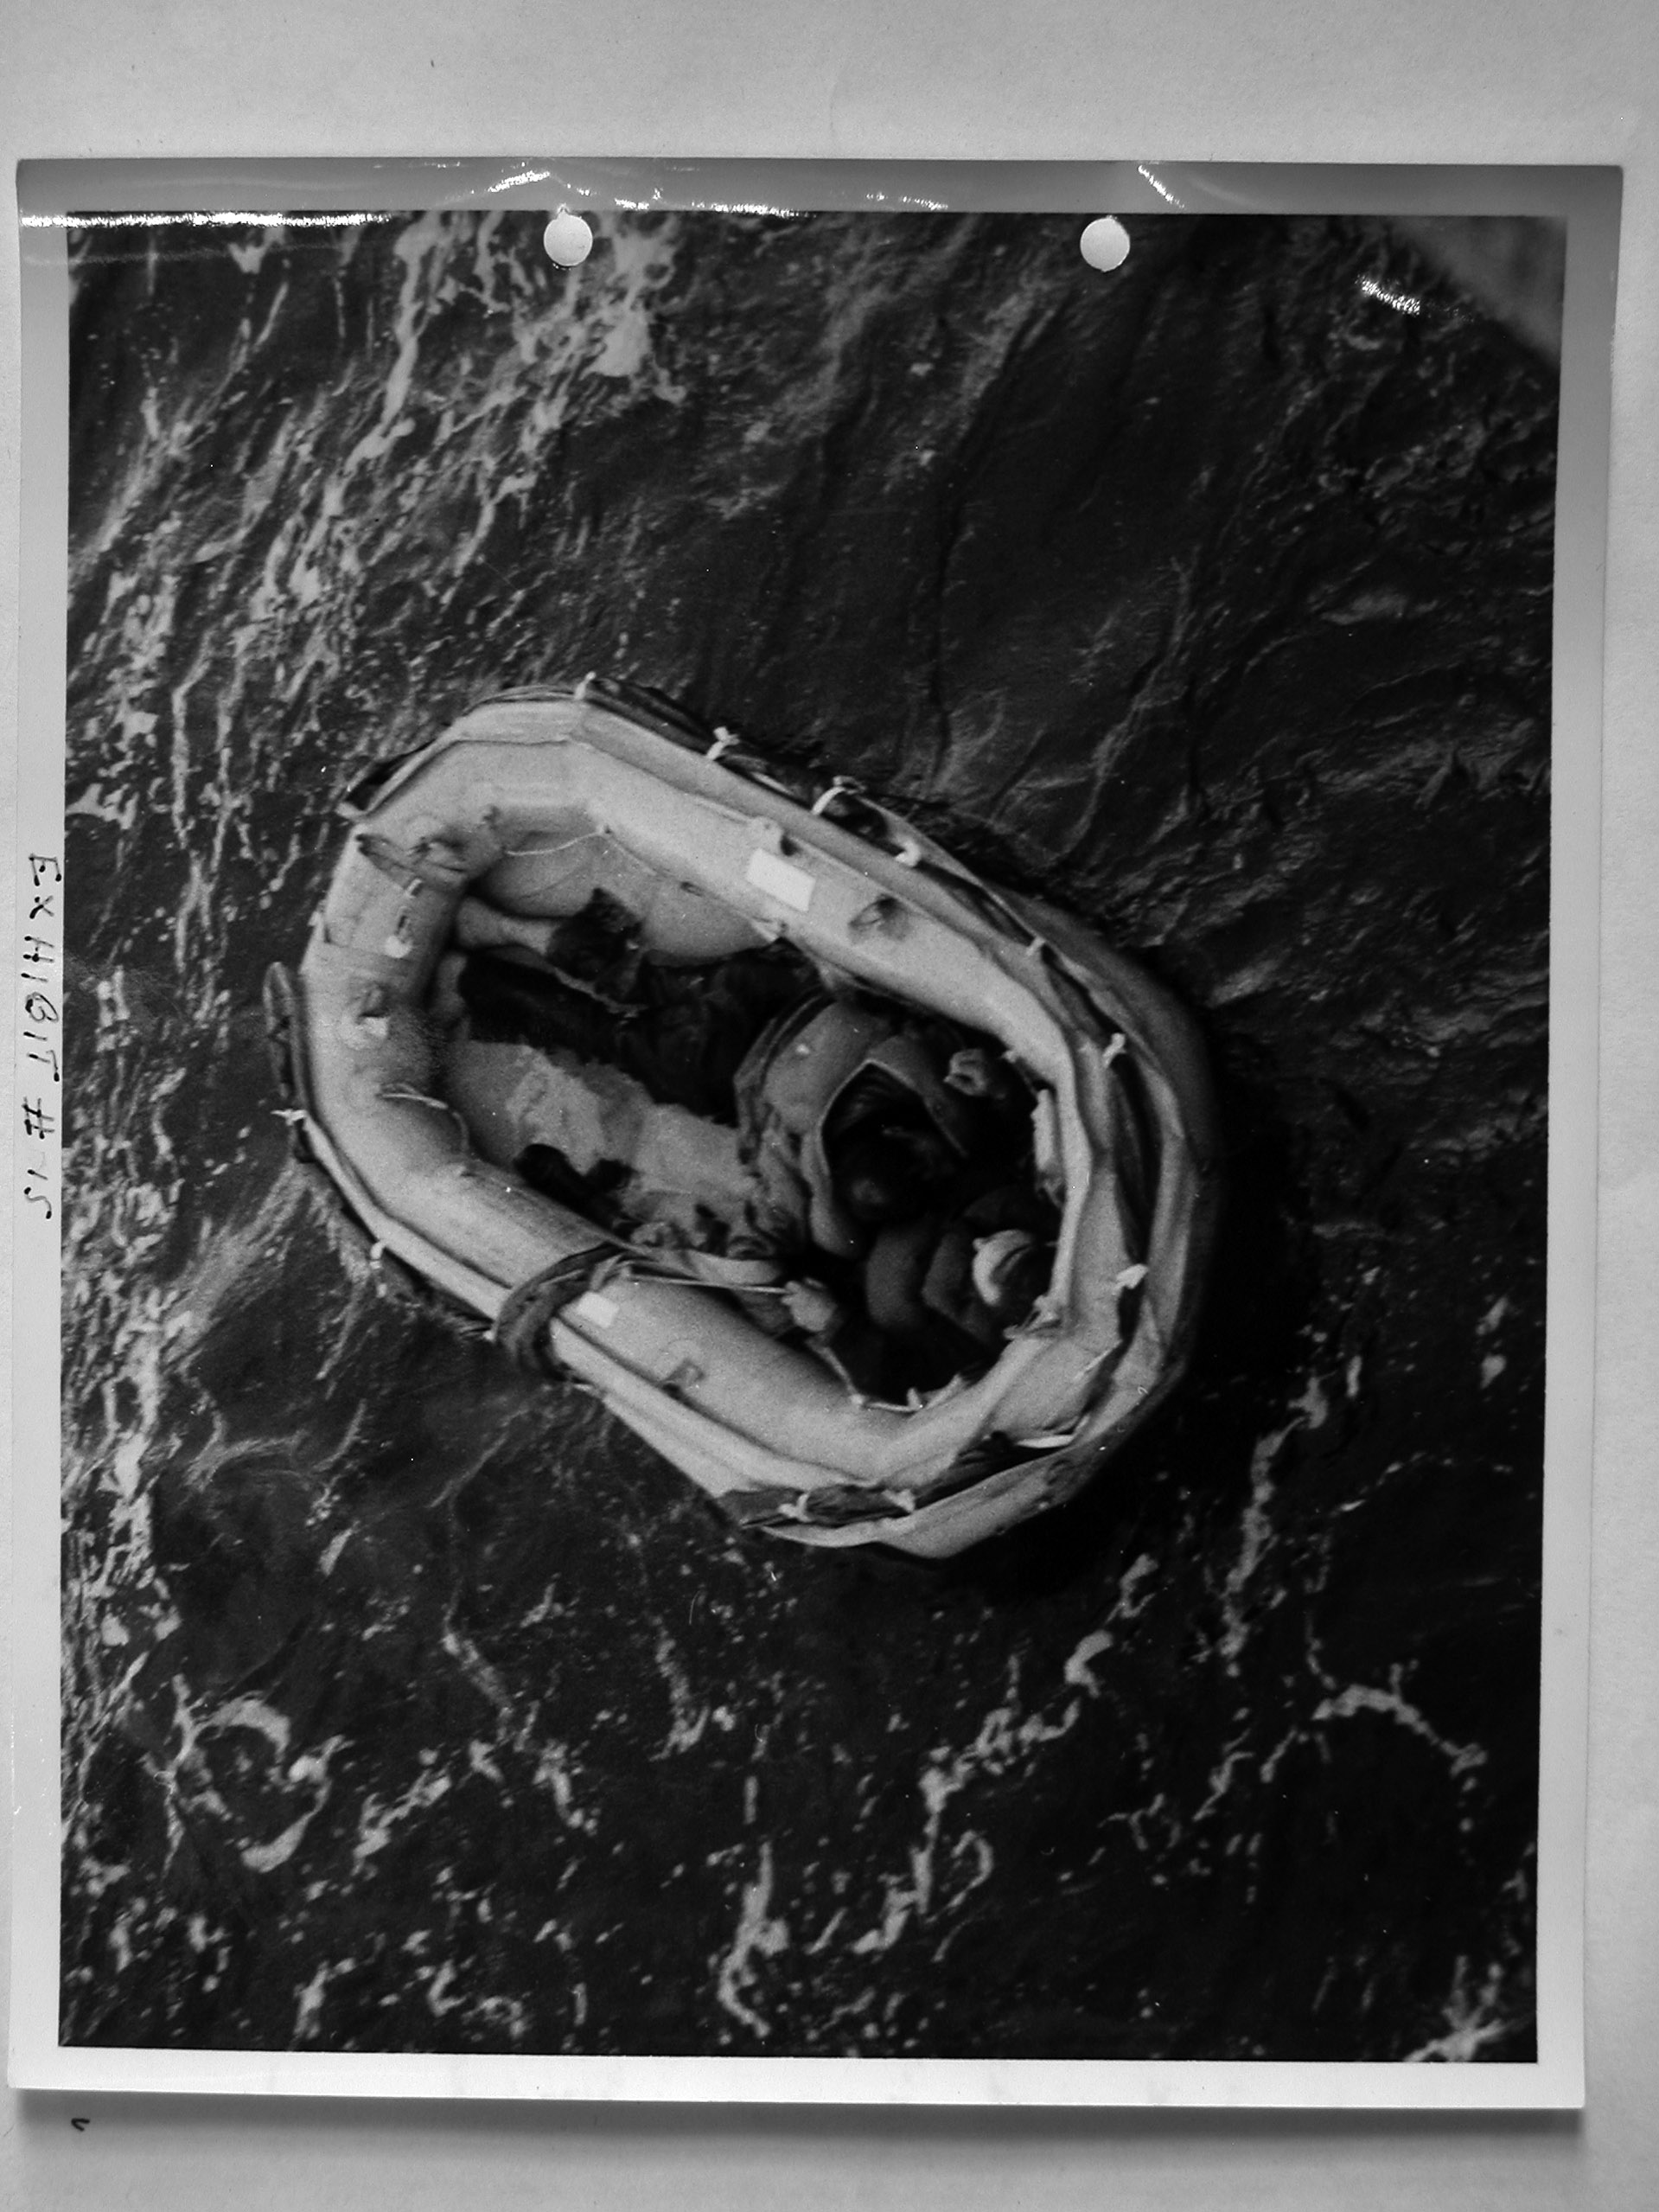 Life raft used in Fort Mercer bow rescue